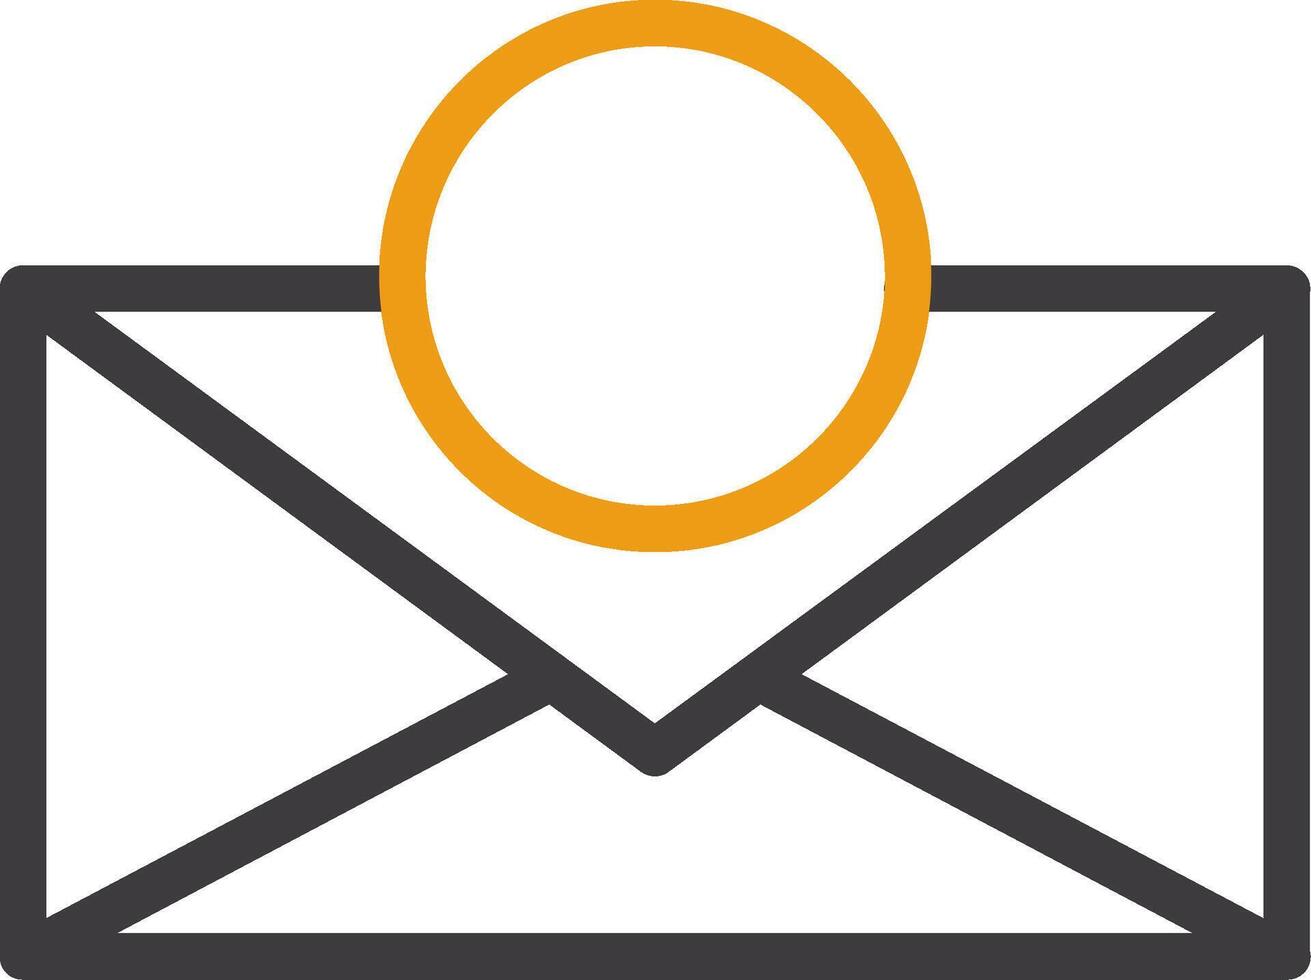 Email Line Two Color Icon vector